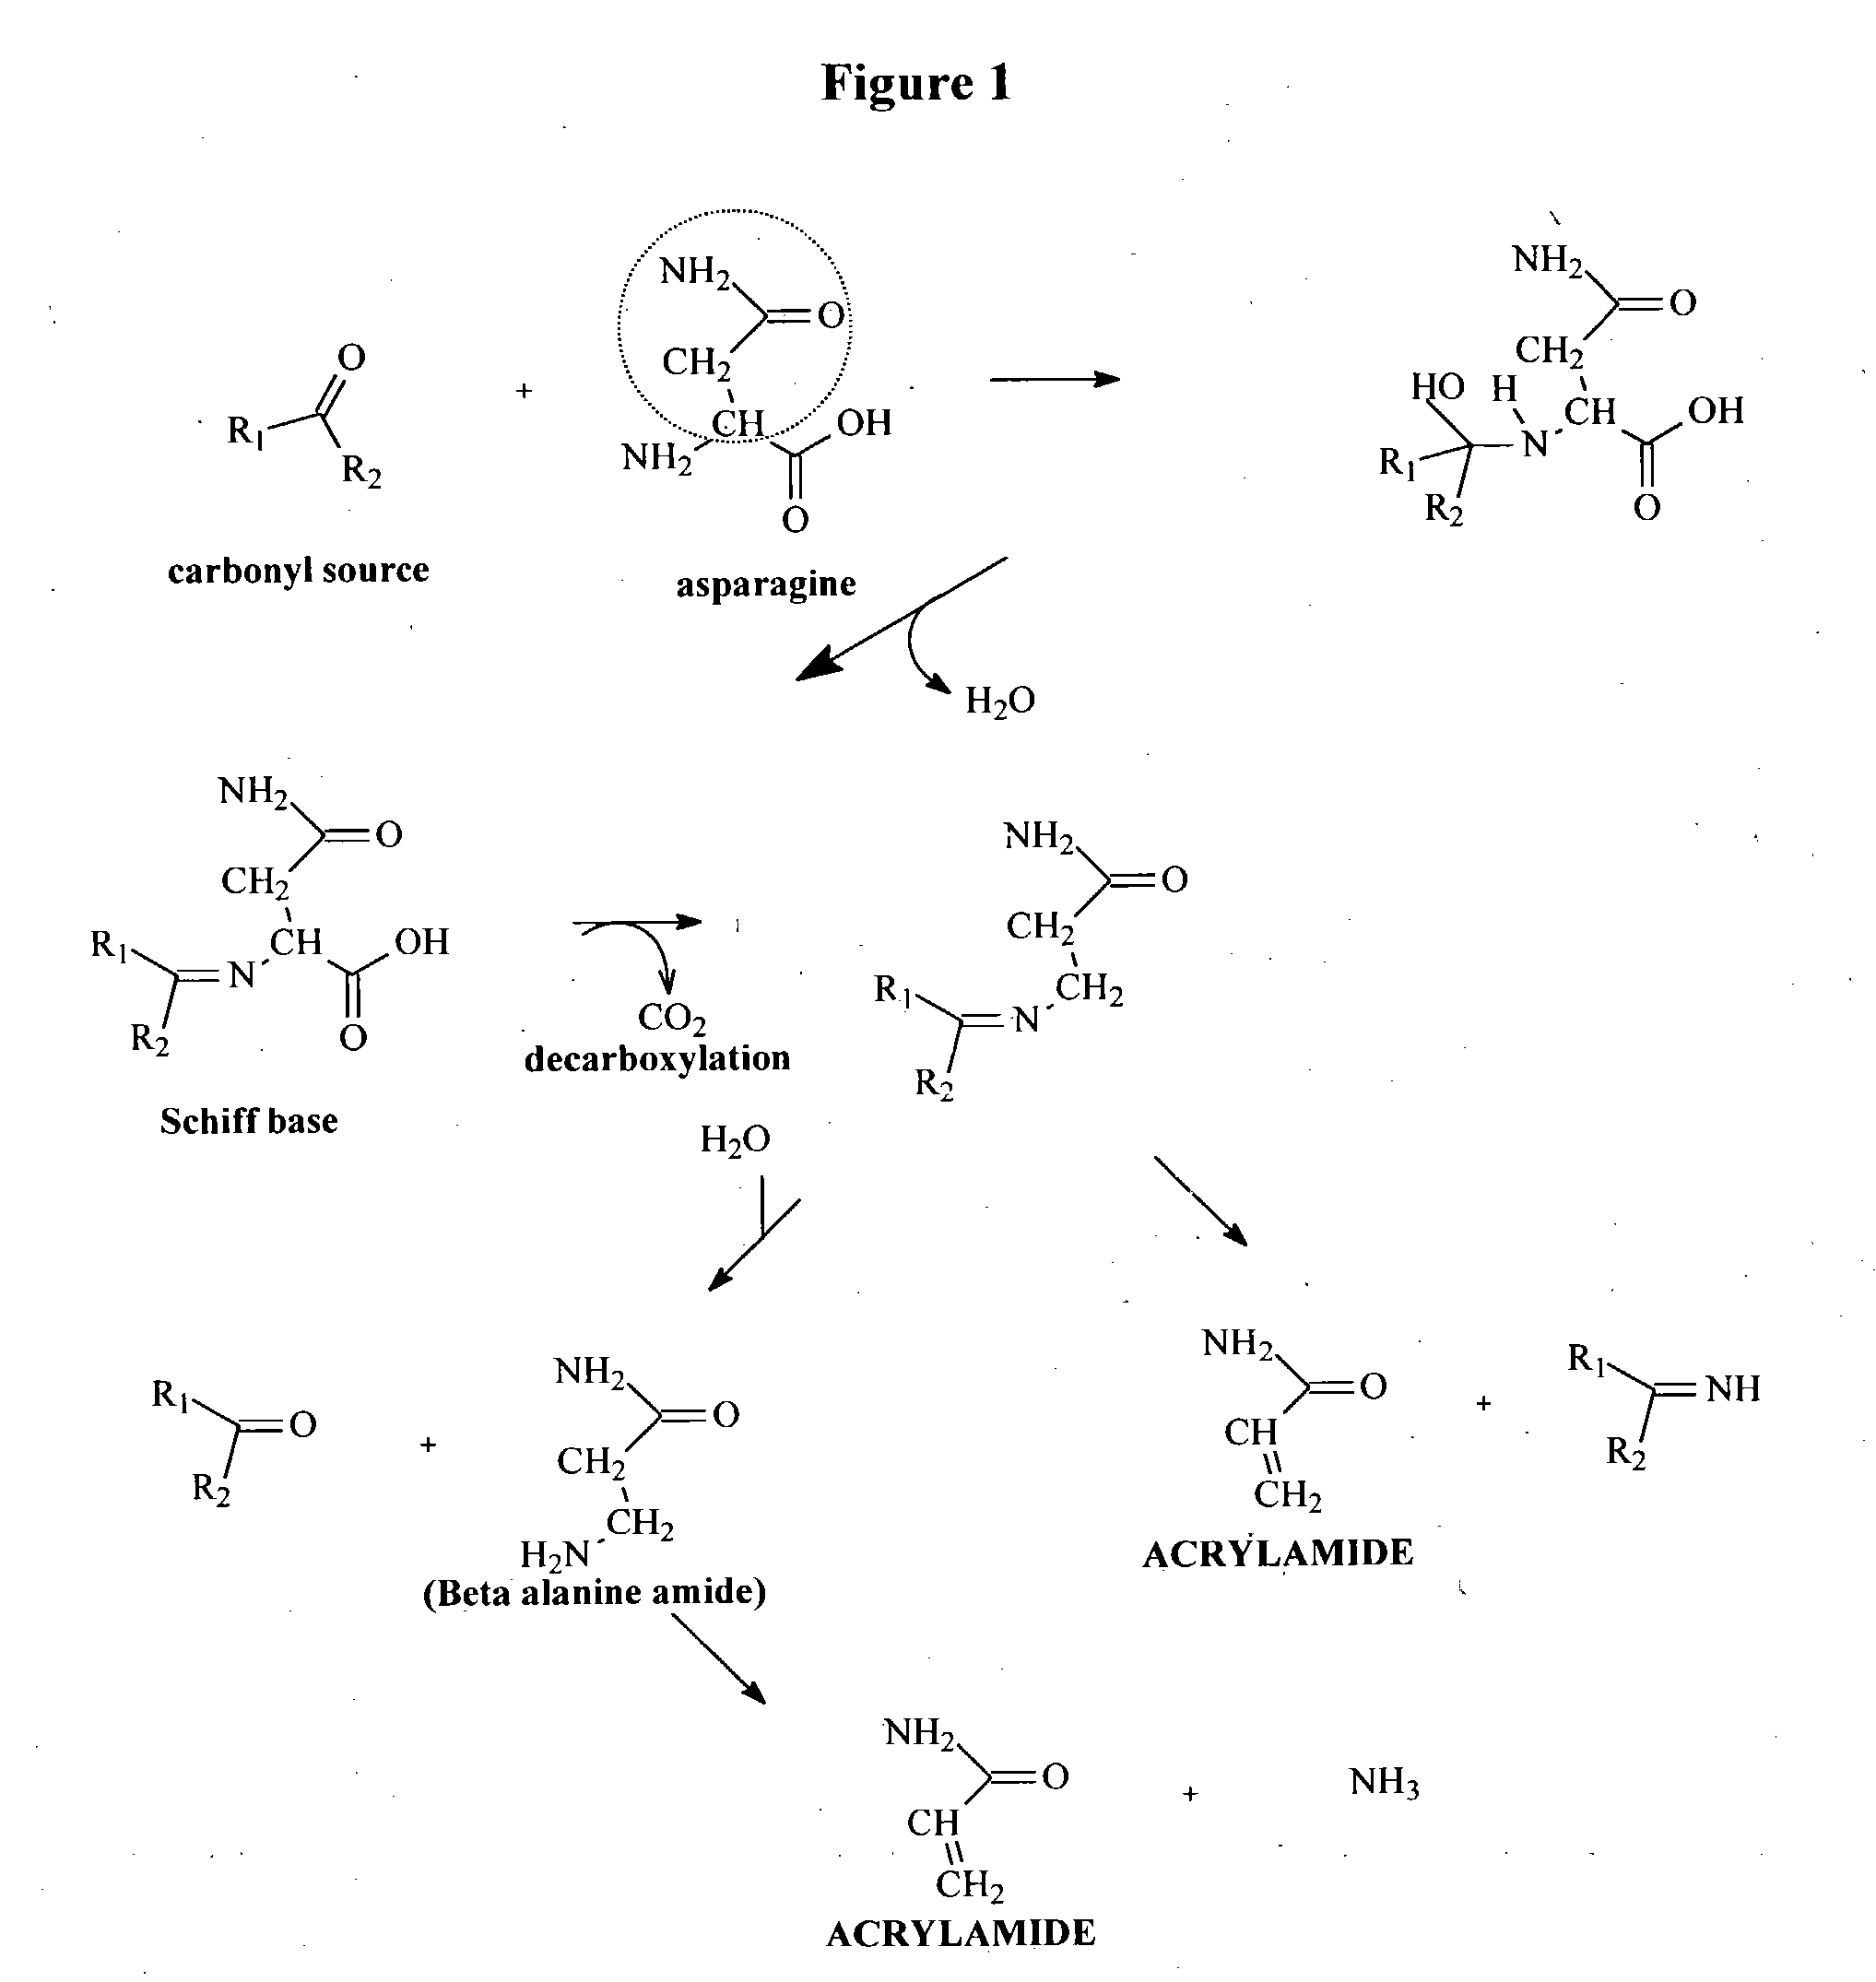 Method for reduction of acrylamide in cocoa products, cocoa products having reduced levels reduced levels of acrylamide, and article of commerce